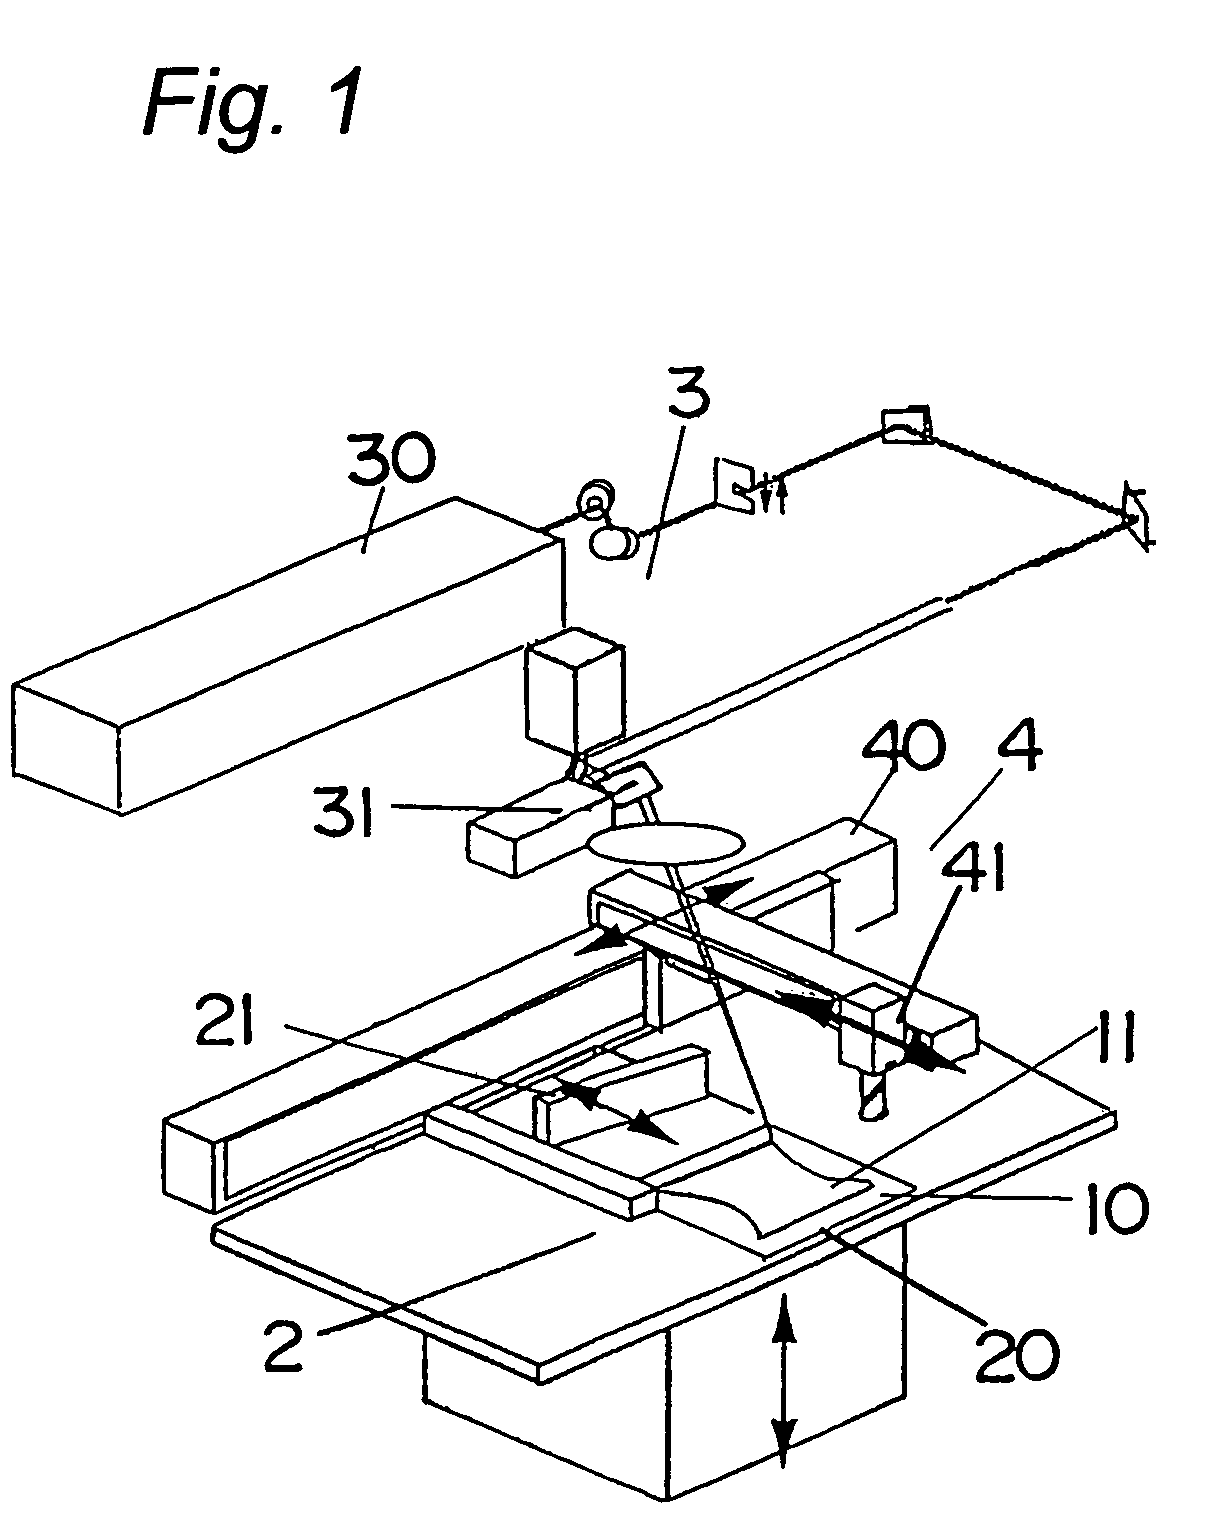 Metal powder composition for use in selective laser sintering